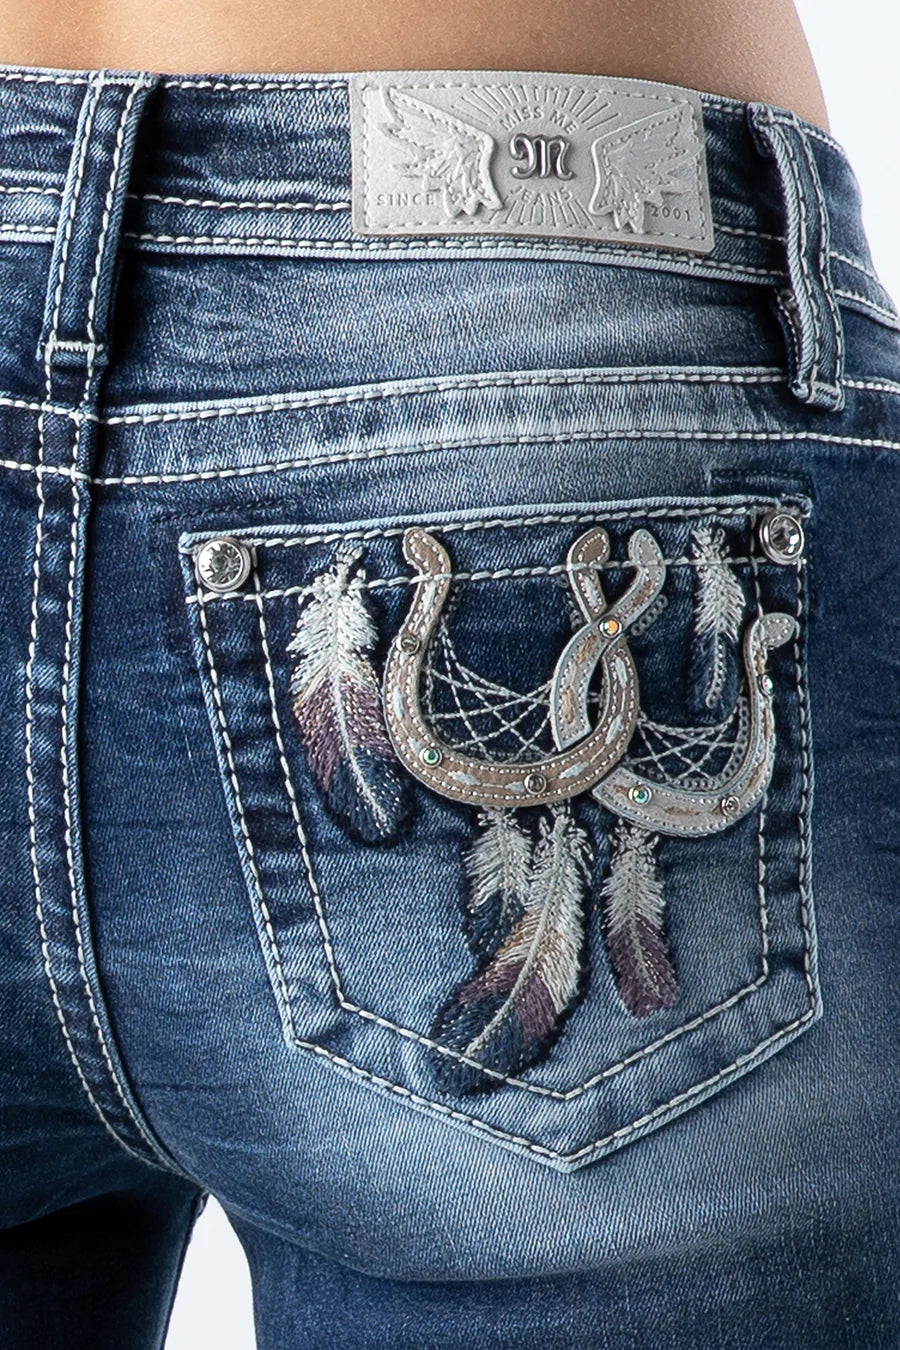 Women's Miss Me Double Horseshoes Bling Pocket Bootcut Jeans